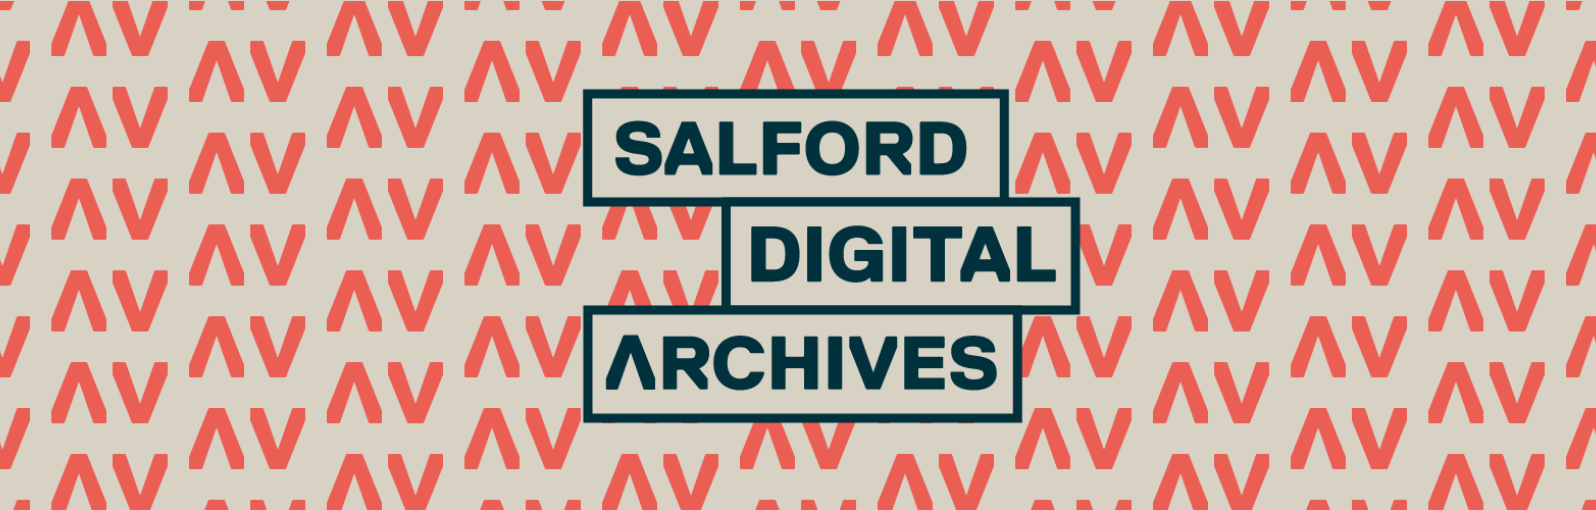 The Salford Digital Archives banner